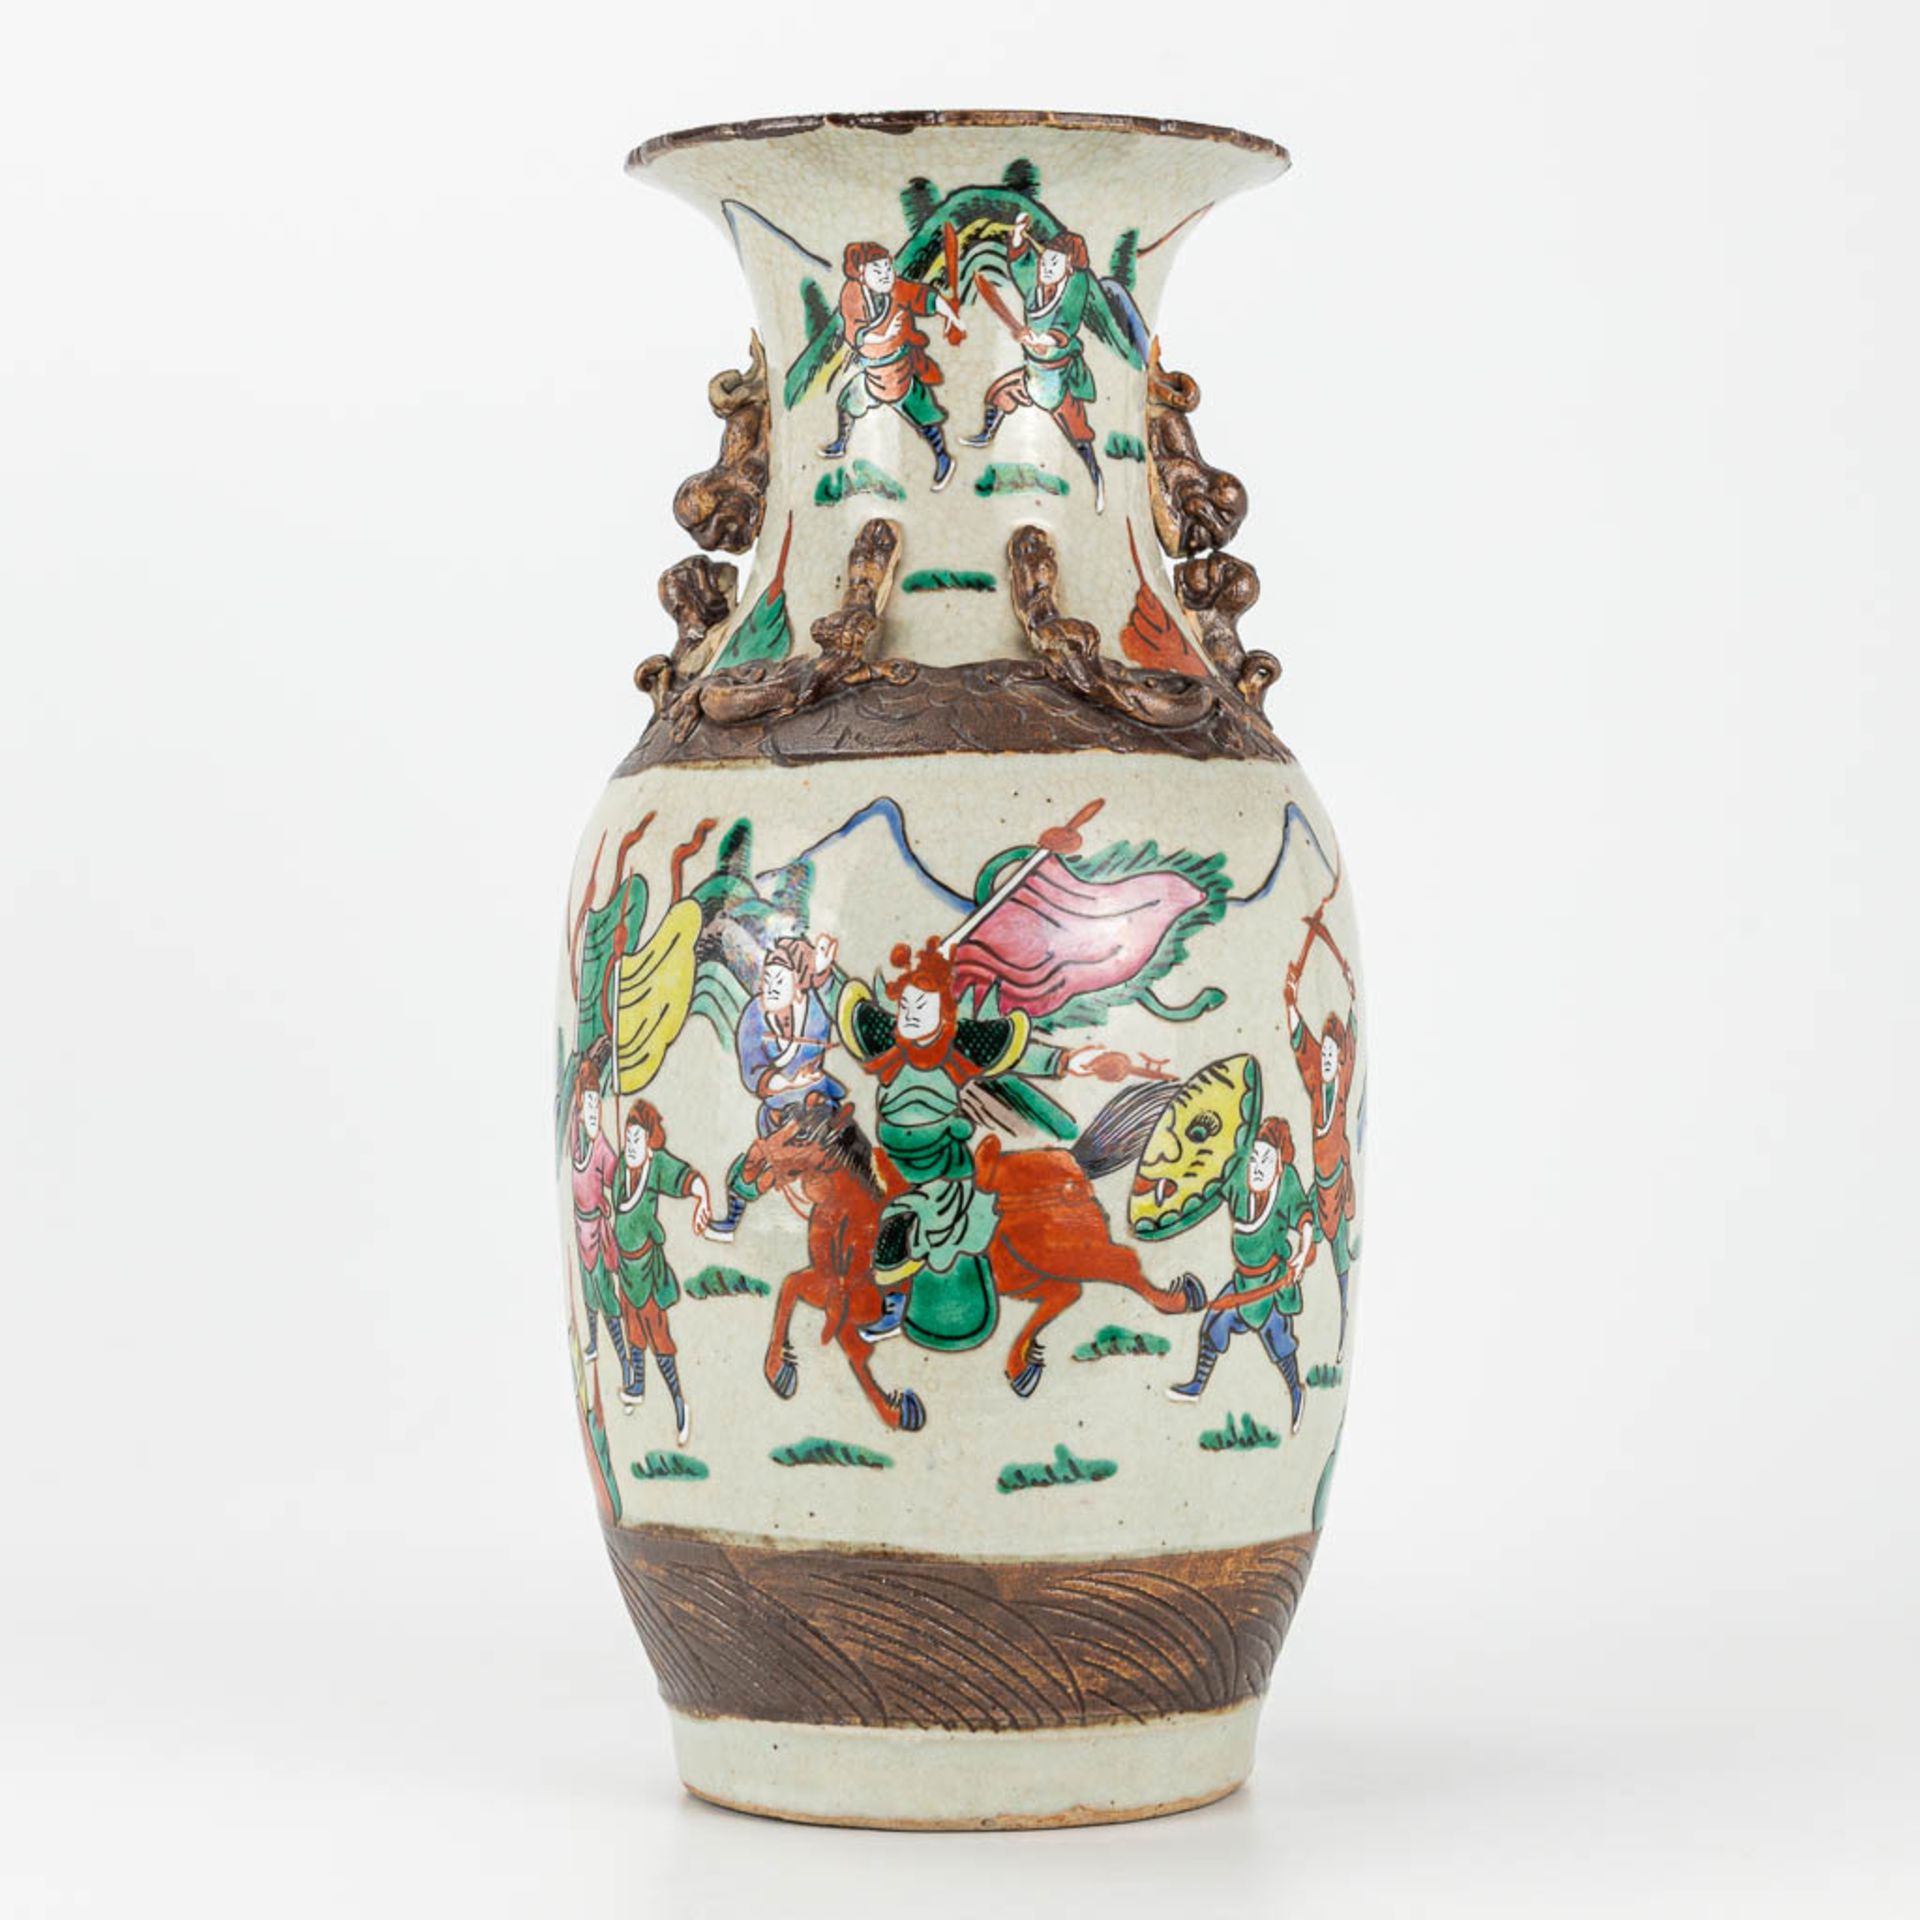 A Nanking vase made of Chinese porcleain and decorated with warriors